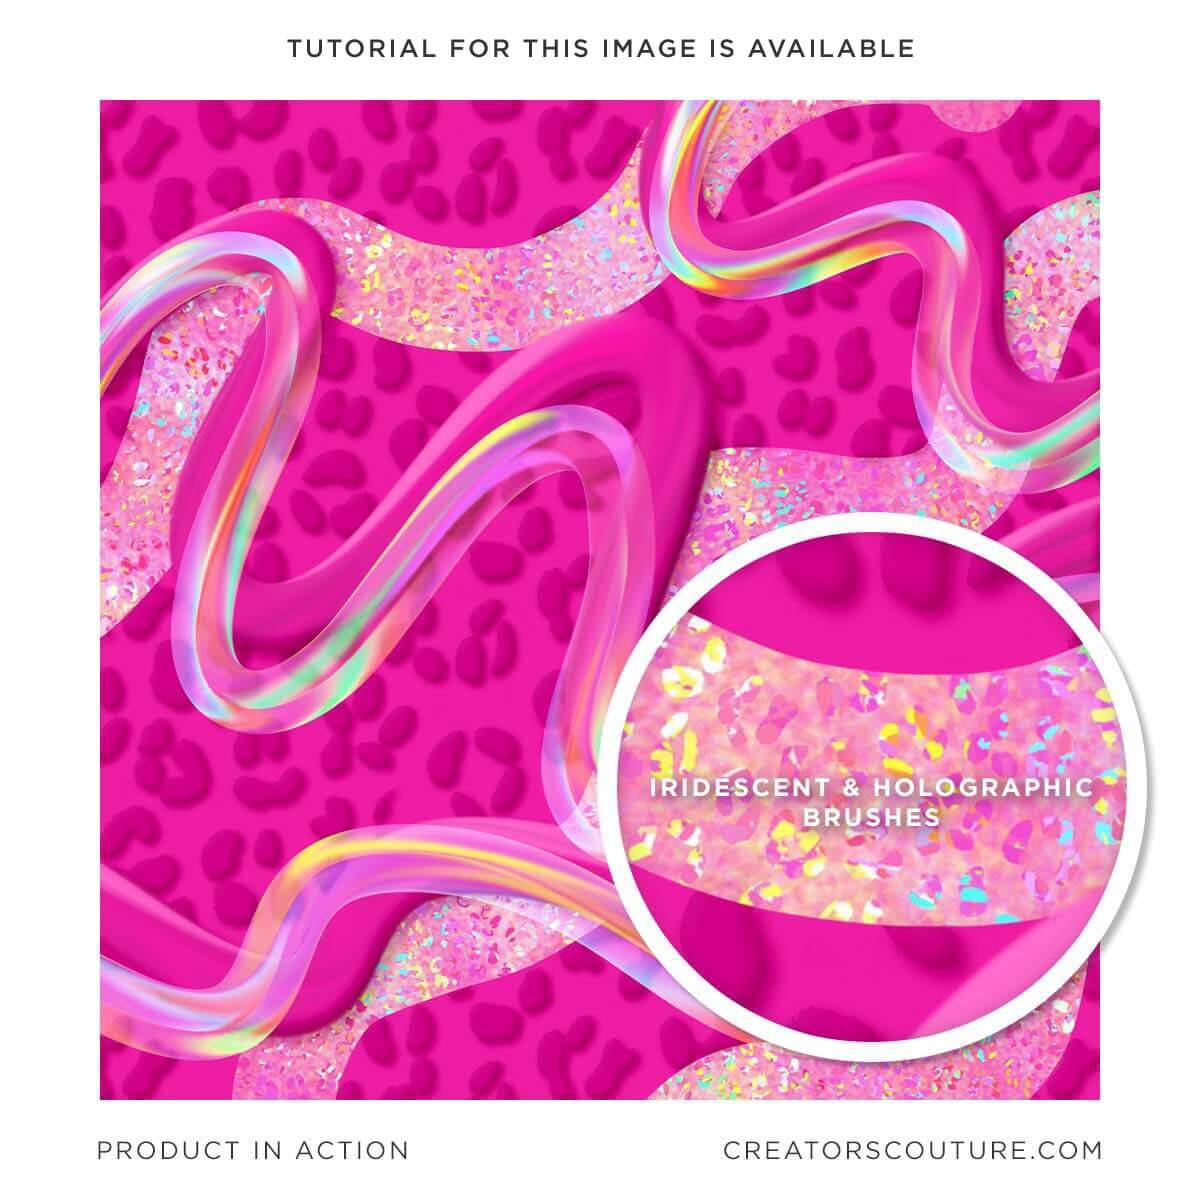 80s style pink and neon digital art background with iridescent and holographic brush strokes created in Photoshop